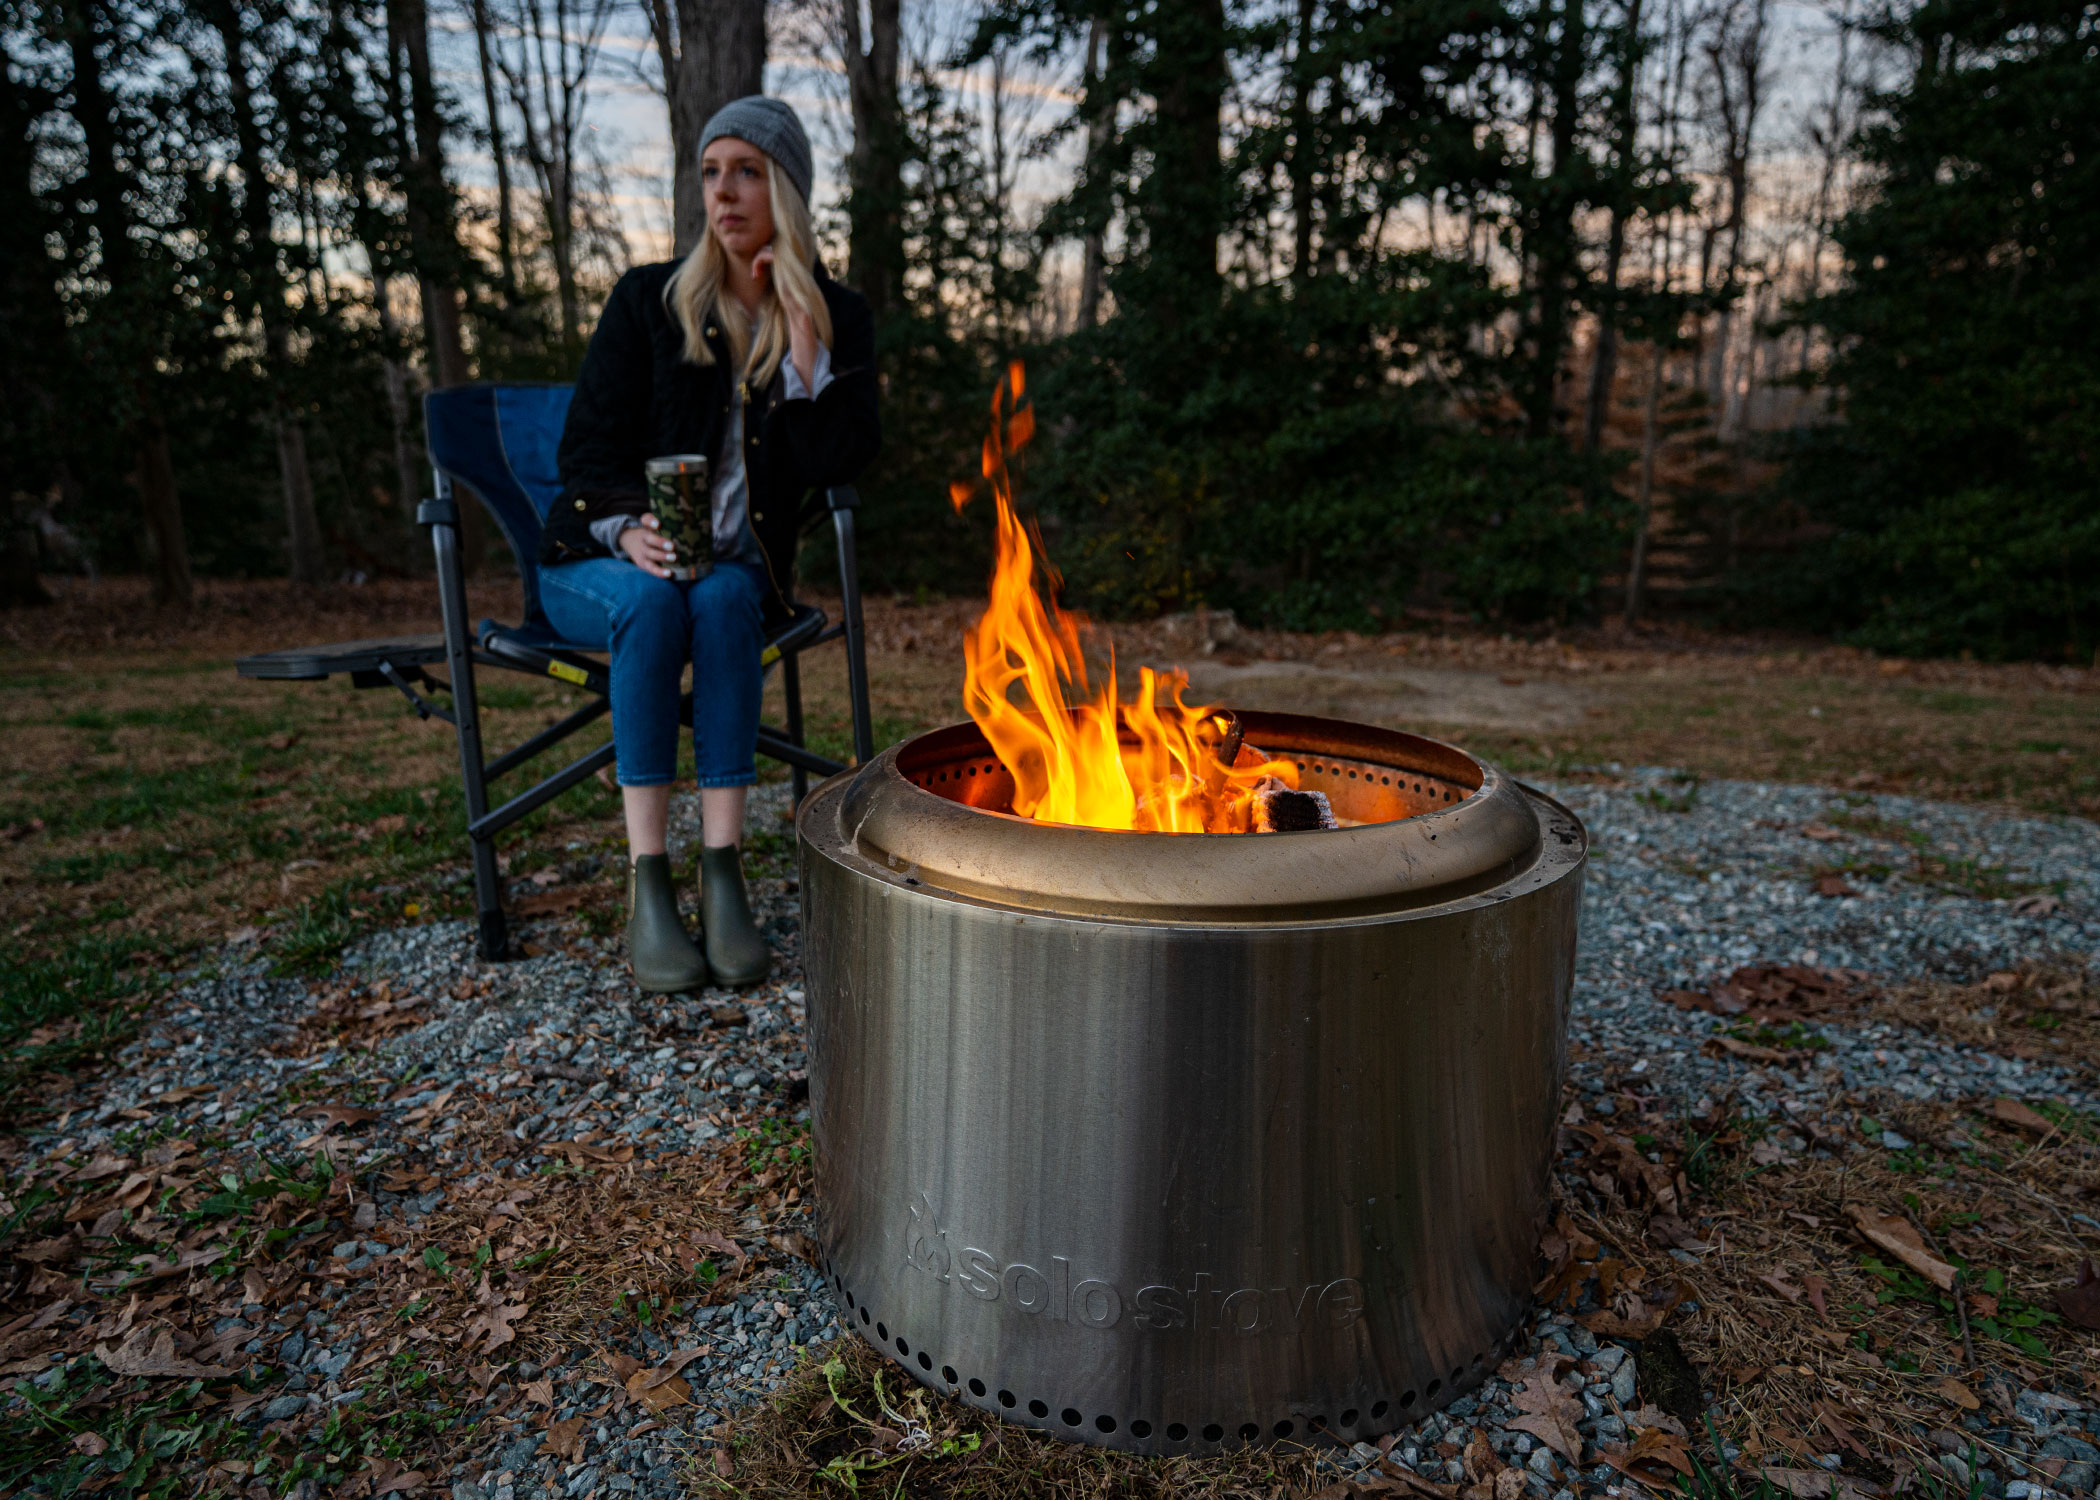 A woman sitting behind a fire pit with trees in the background